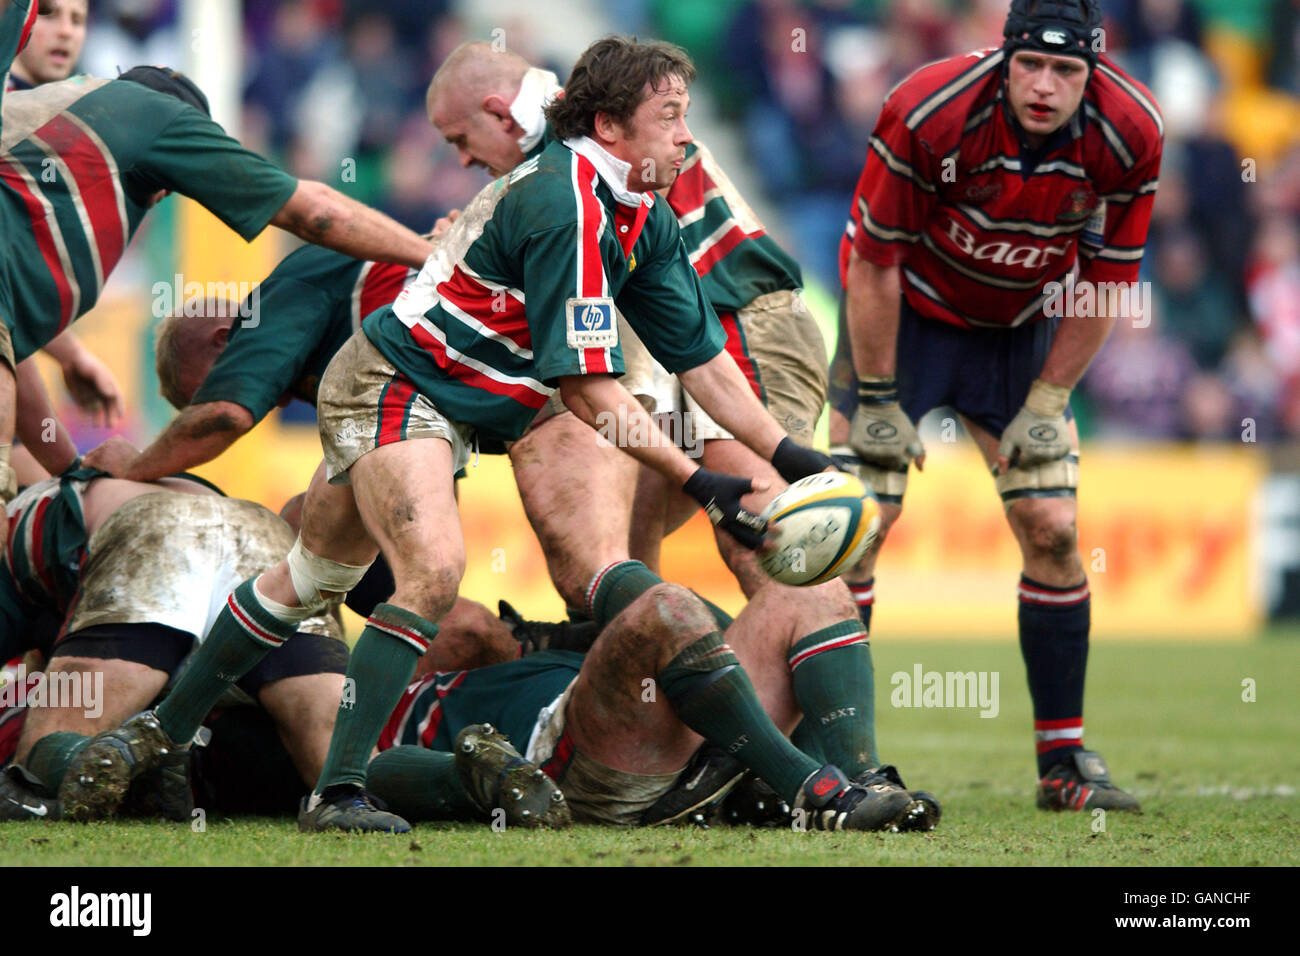 Rugby Union - Powergen Cup - Semi Final - Leicester Tigers v Gloucester. Leicester Tigers' Jamie Hamilton throws the bal Stock Photo